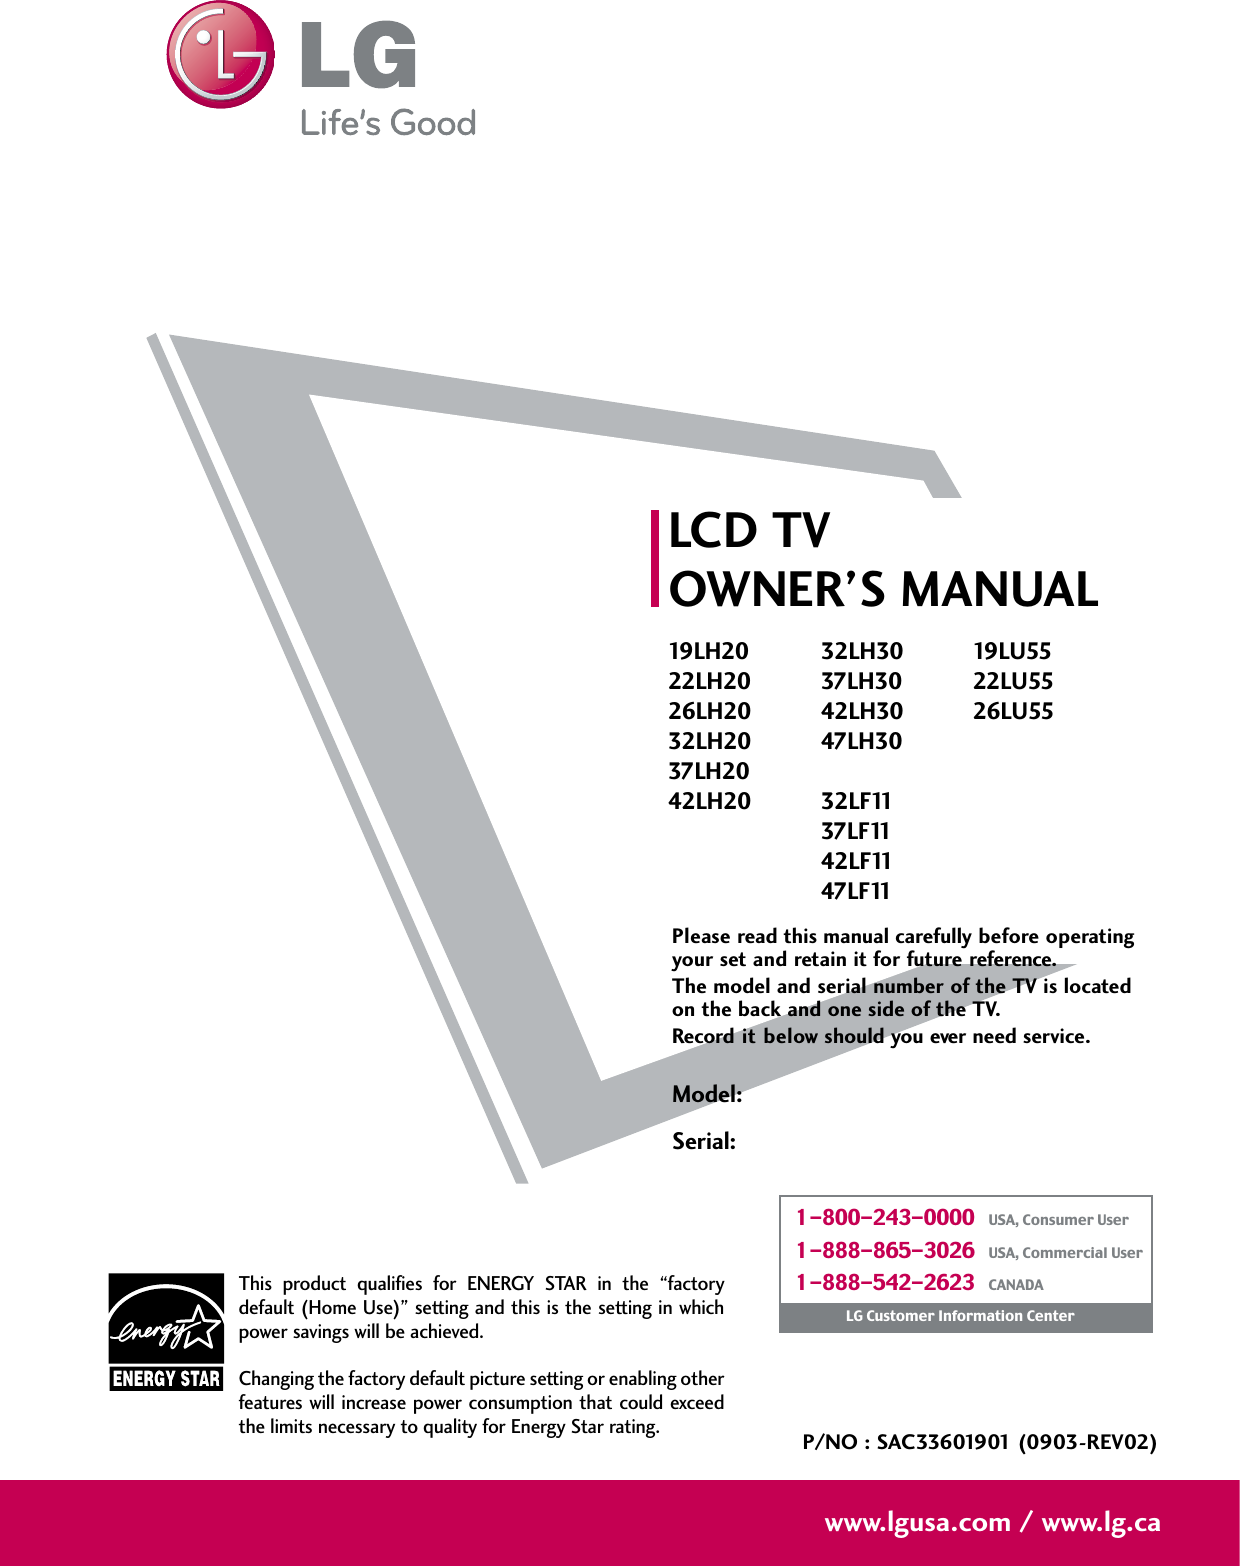 Please read this manual carefully before operatingyour set and retain it for future reference.The model and serial number of the TV is locatedon the back and one side of the TV. Record it below should you ever need service.Model:Serial:LCD TVOWNER’S MANUAL19LH2022LH2026LH2032LH2037LH2042LH2032LH3037LH3042LH3047LH3032LF1137LF1142LF1147LF1119LU5522LU5526LU55P/NO : SAC33601901 (0903-REV02)www.lgusa.com / www.lg.caThis  product  qualifies  for  ENERGY  STAR  in  the  “factorydefault (Home Use)” setting and this is the setting in whichpower savings will be achieved.Changing the factory default picture setting or enabling otherfeatures will increase power  consumption that could exceedthe limits necessary to quality for Energy Star rating.1-800-243-0000   USA, Consumer User1-888-865-3026   USA, Commercial User1-888-542-2623   CANADALG Customer Information Center